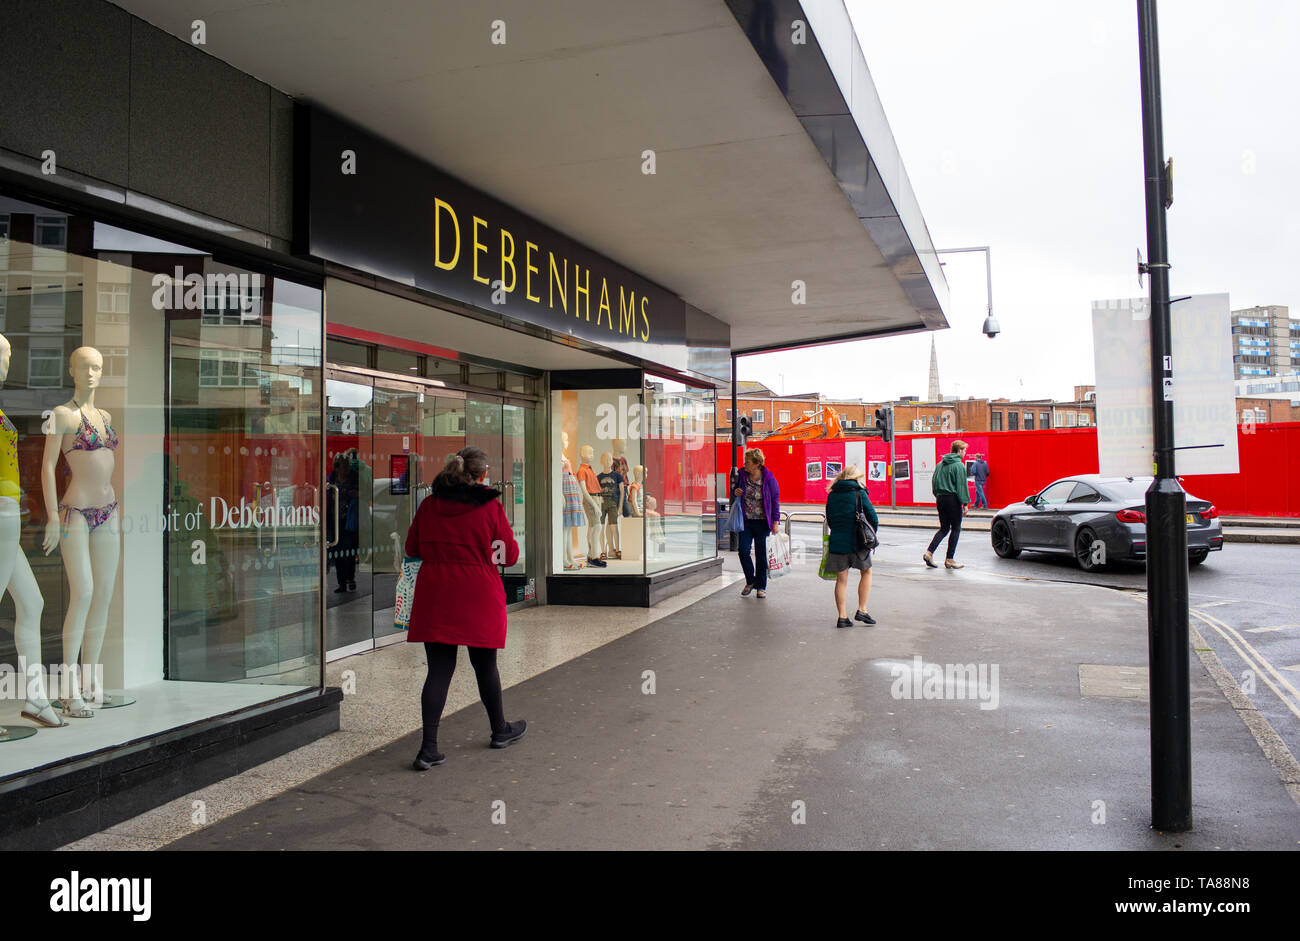 Debenhams building and department store in Southampton city centre which has been part of the city since 1960. Stock Photo